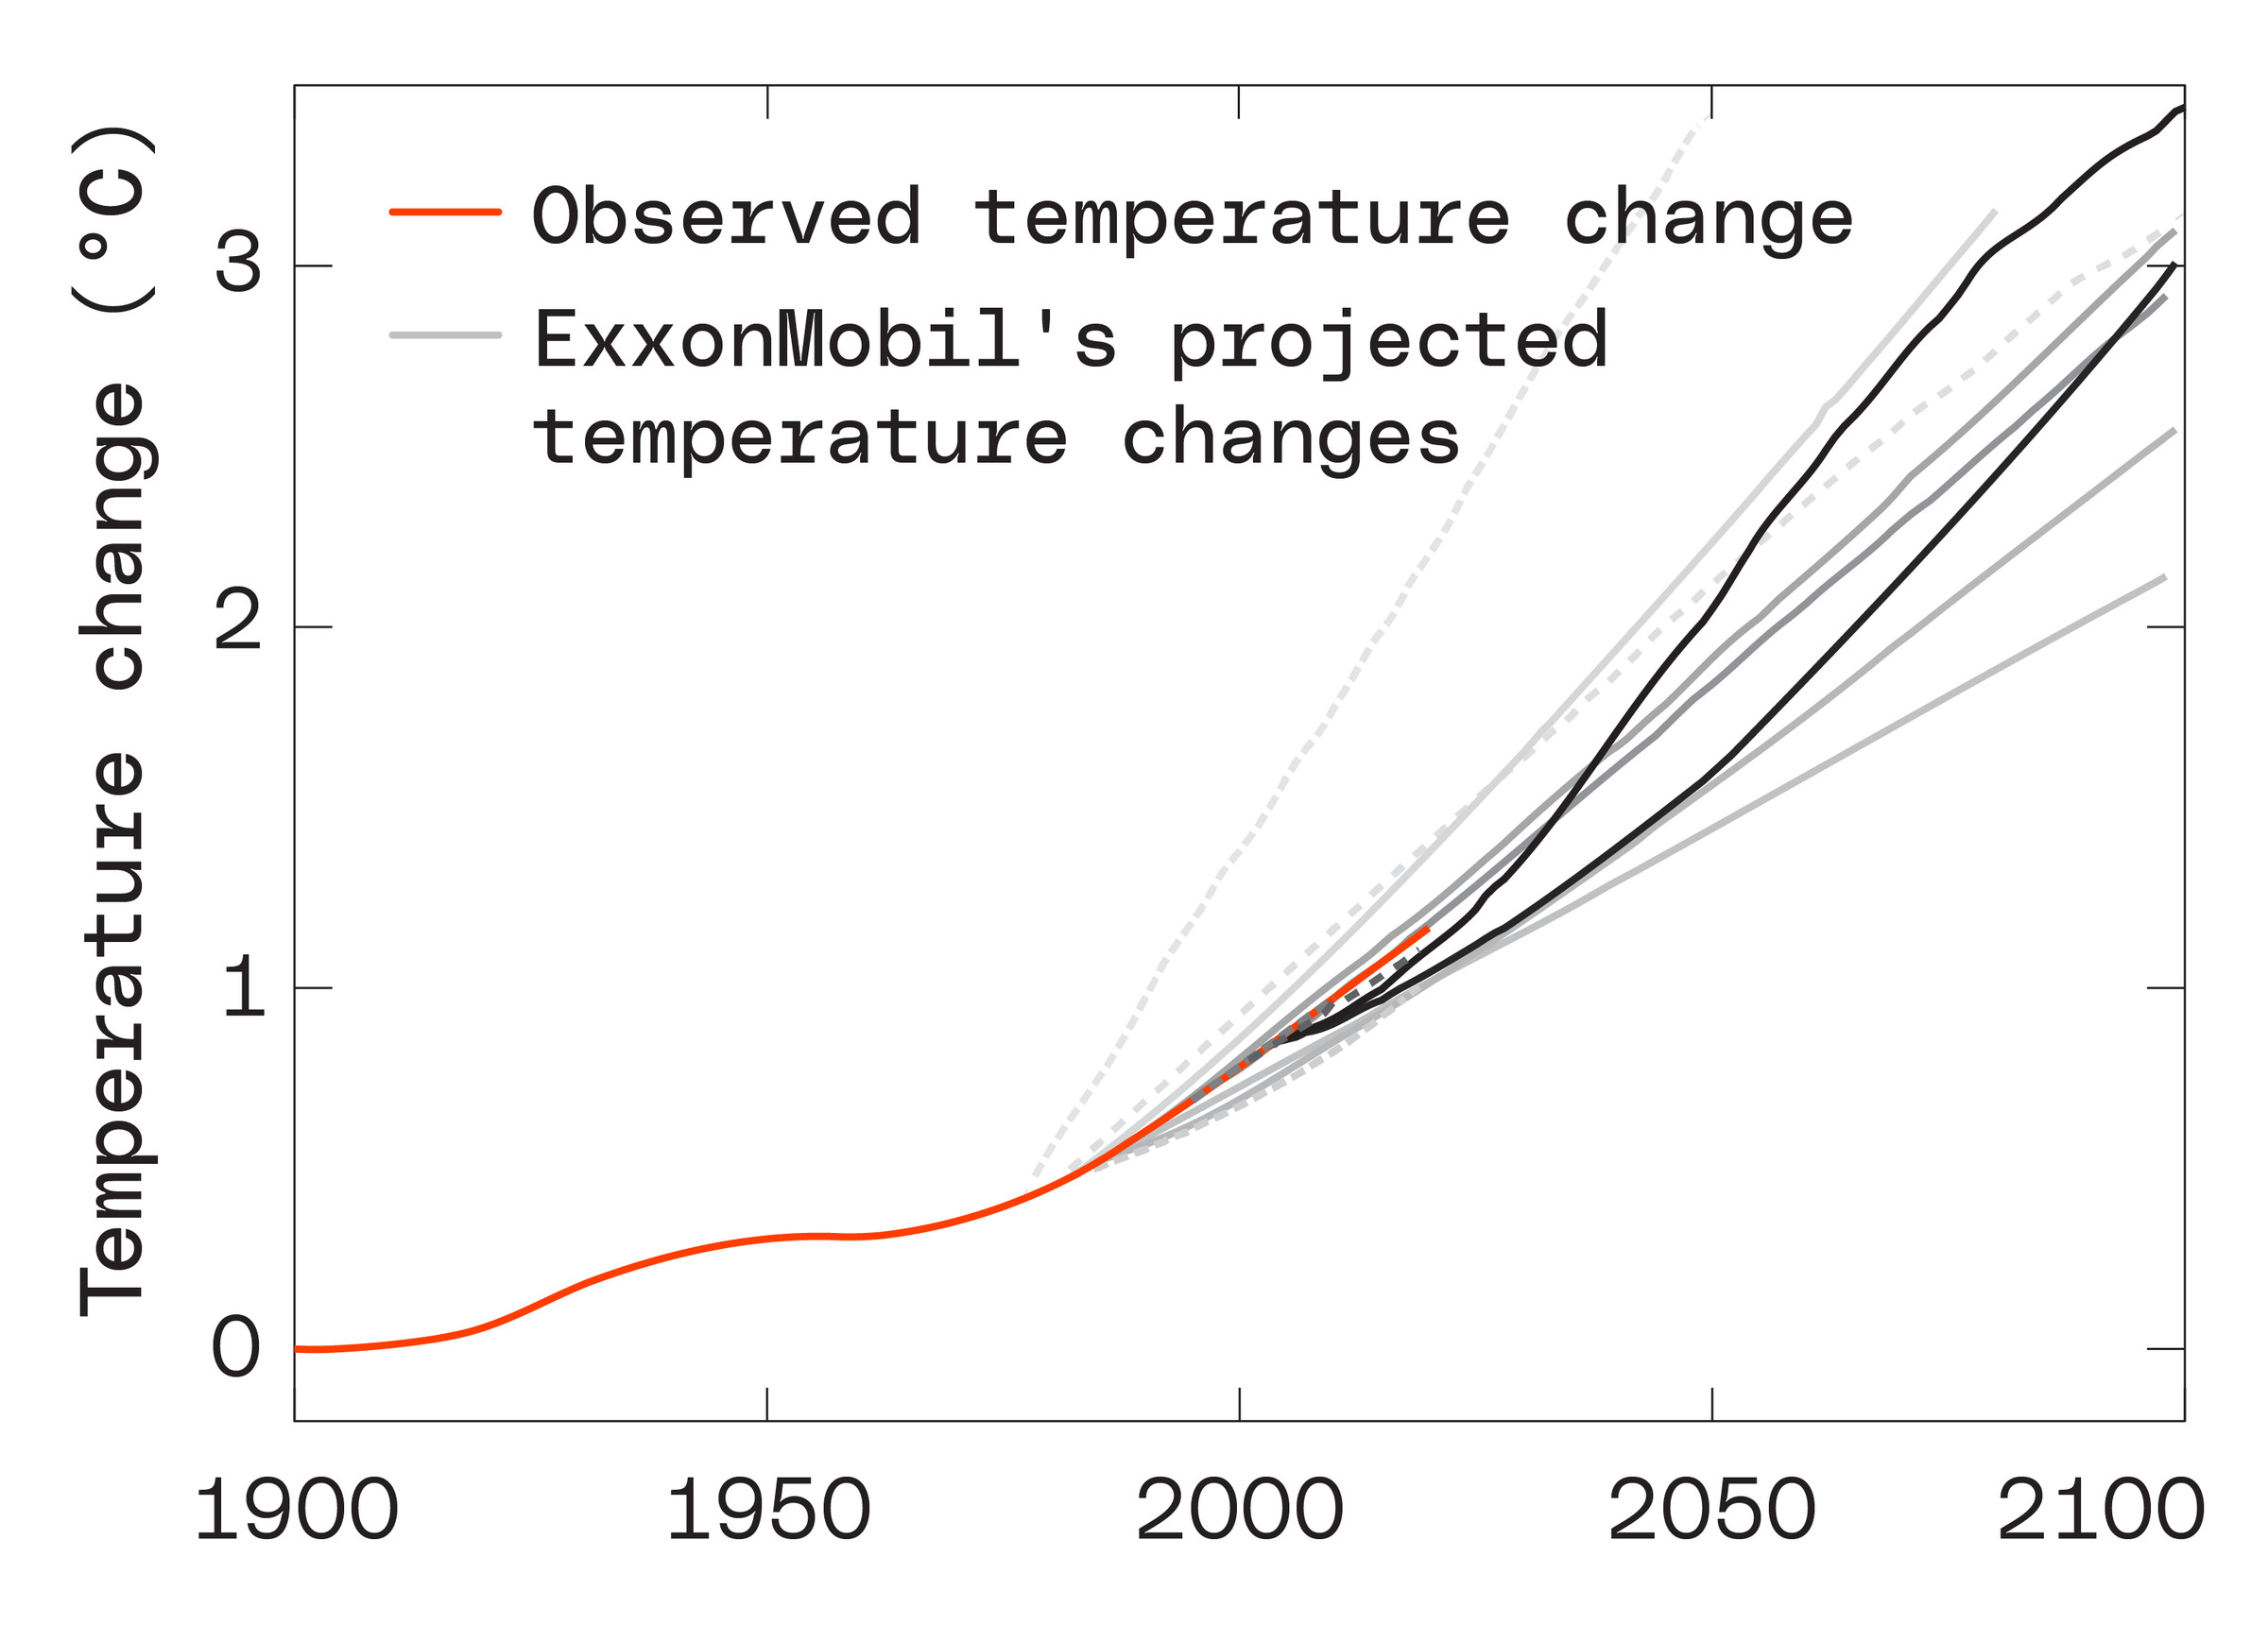 Several lines are plotted on a graph.  Multiple gray lines show ExxonMobil's climate projections over time.  A red line, which lies very close to the gray lines, shows the observed changes in global temperature.